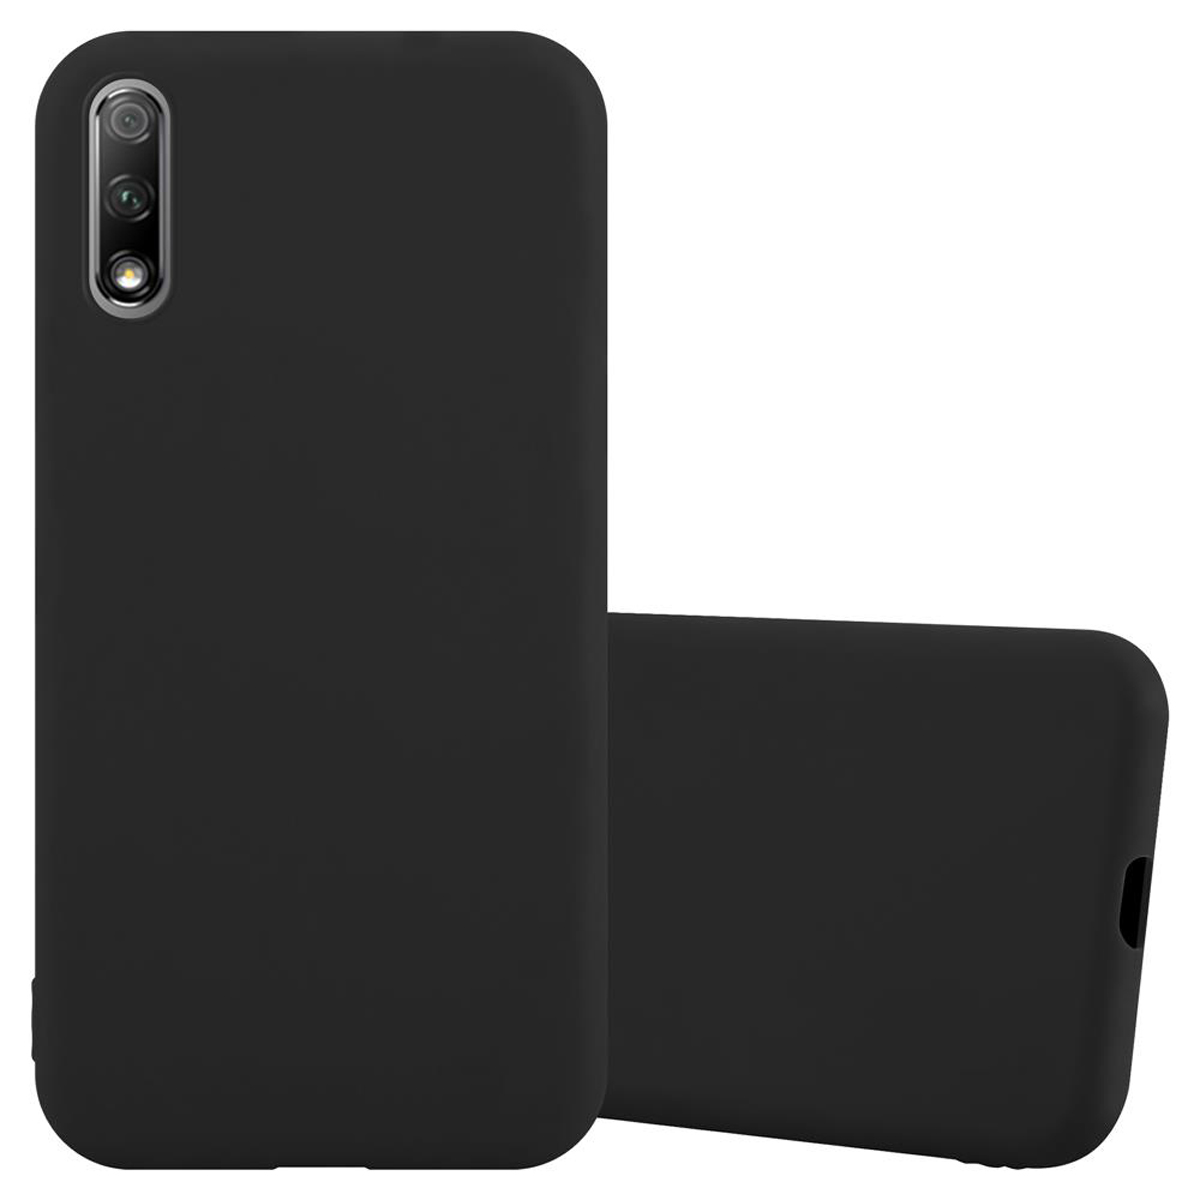 Backcover, CADORABO Candy Hülle Style, CANDY SCHWARZ im 9X, TPU Honor,